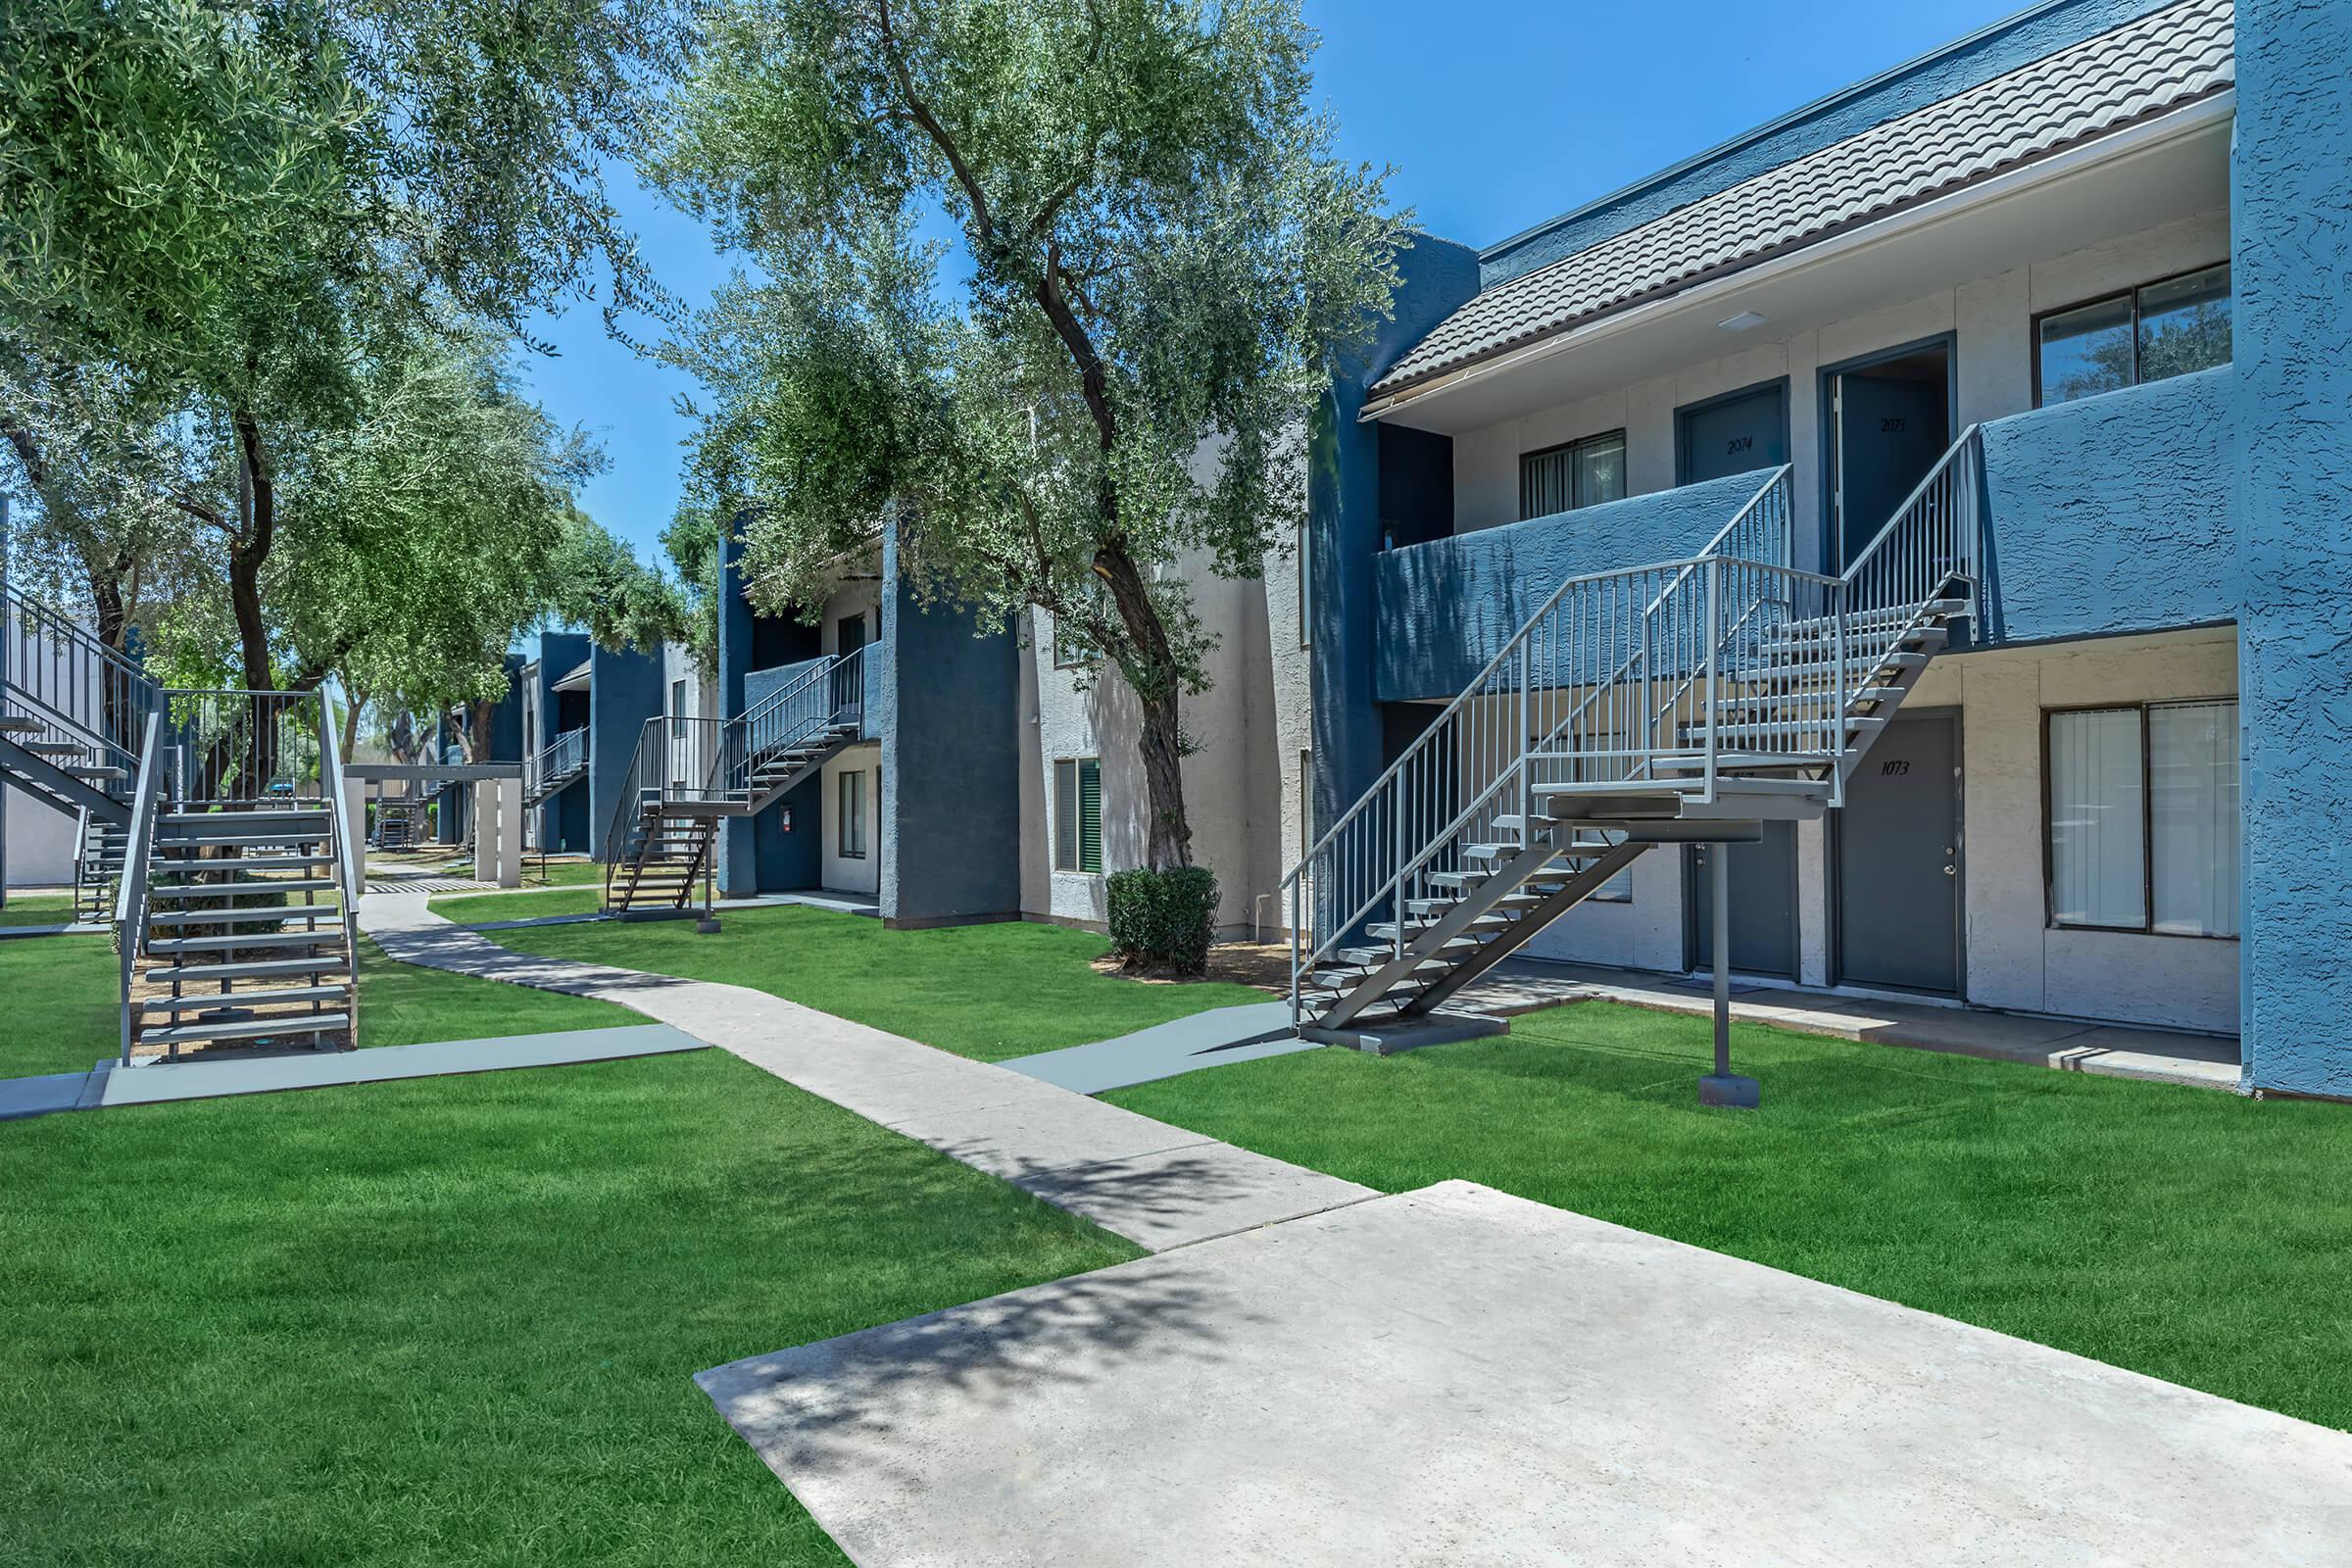 Blue and grey exterior Glendale apartment buildings around grass and sidewalk walkway